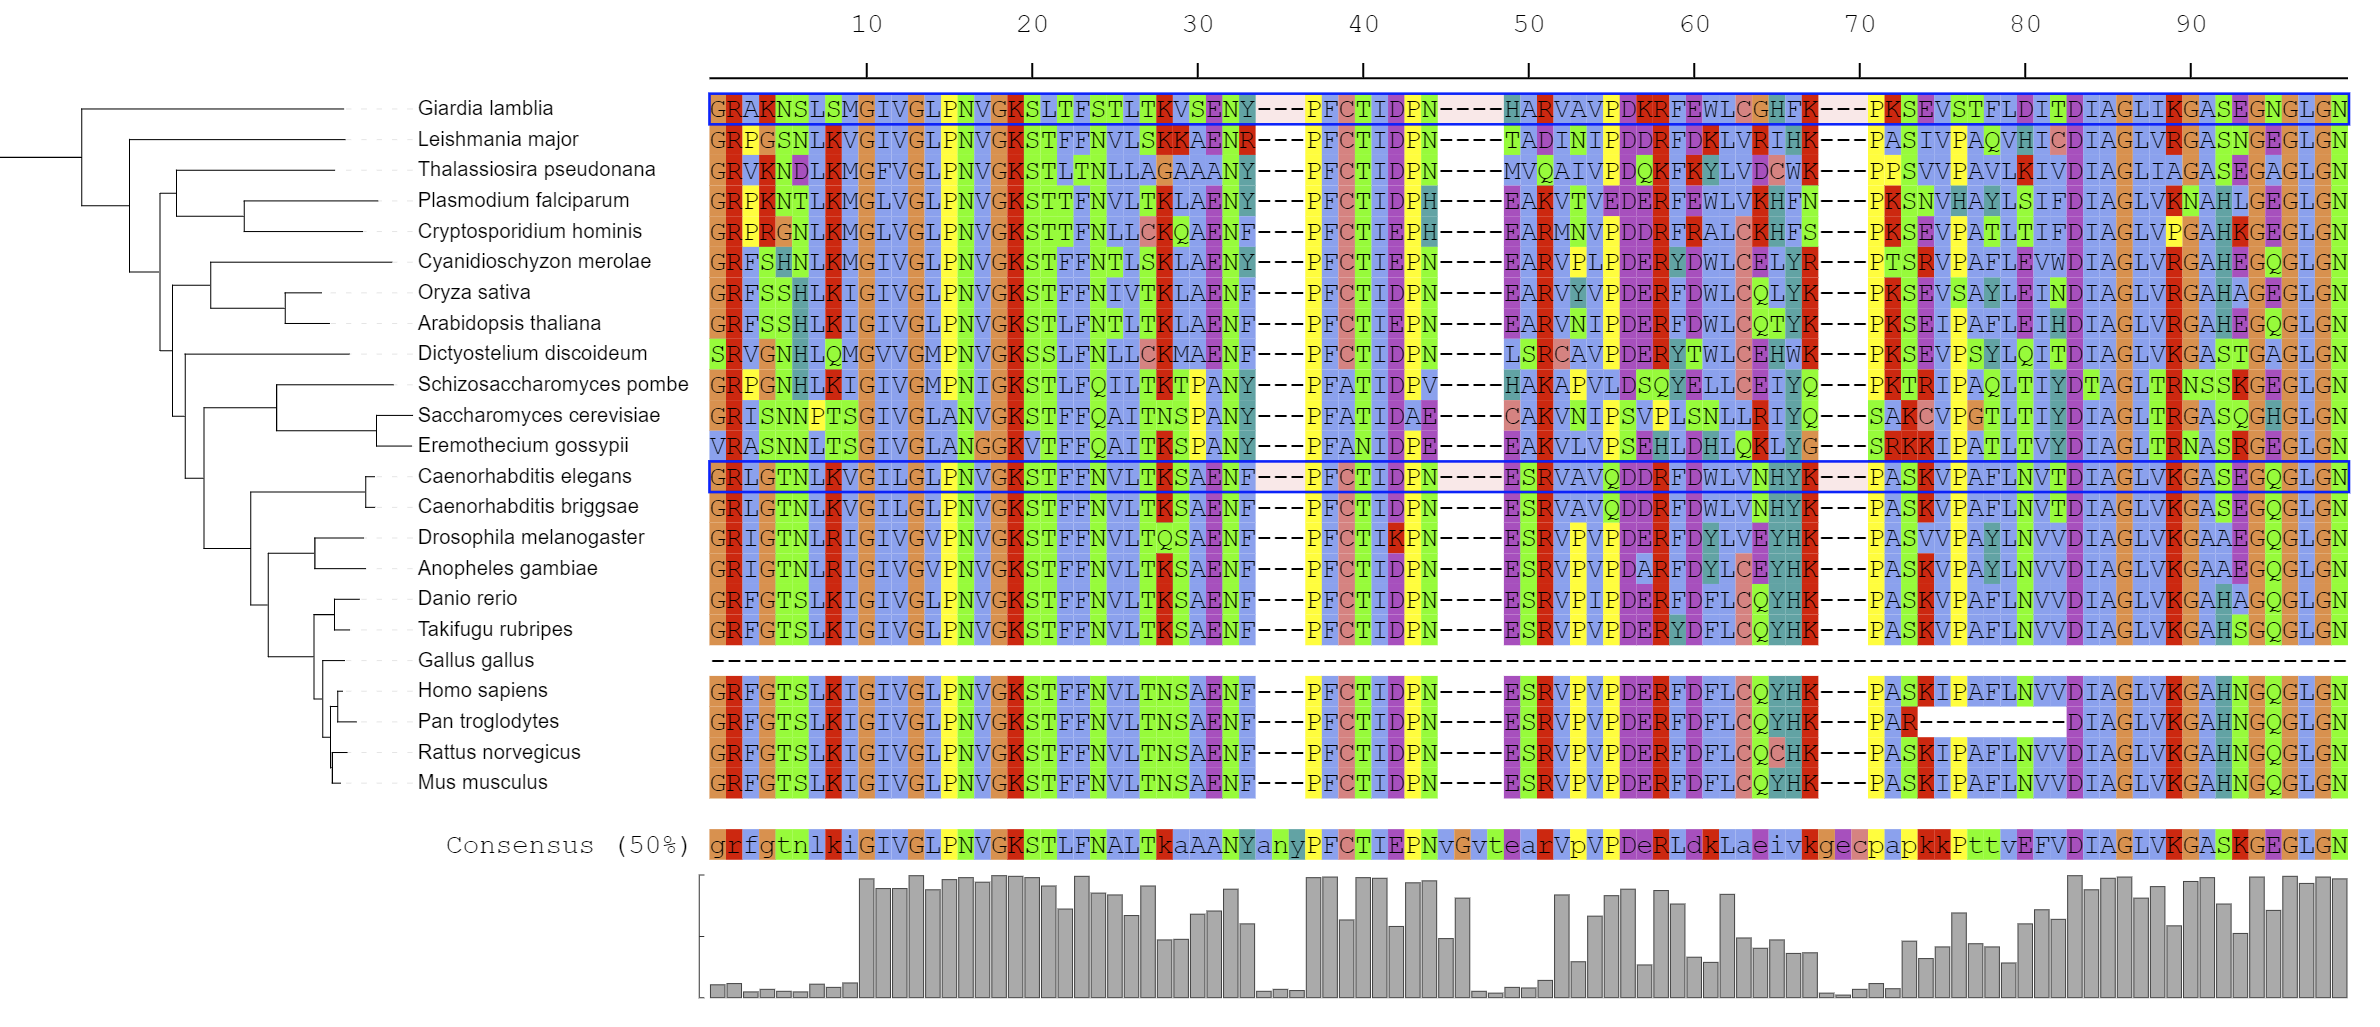 An example multiple sequence alignment visualized on a tree, with 2 reference sequences highlighted